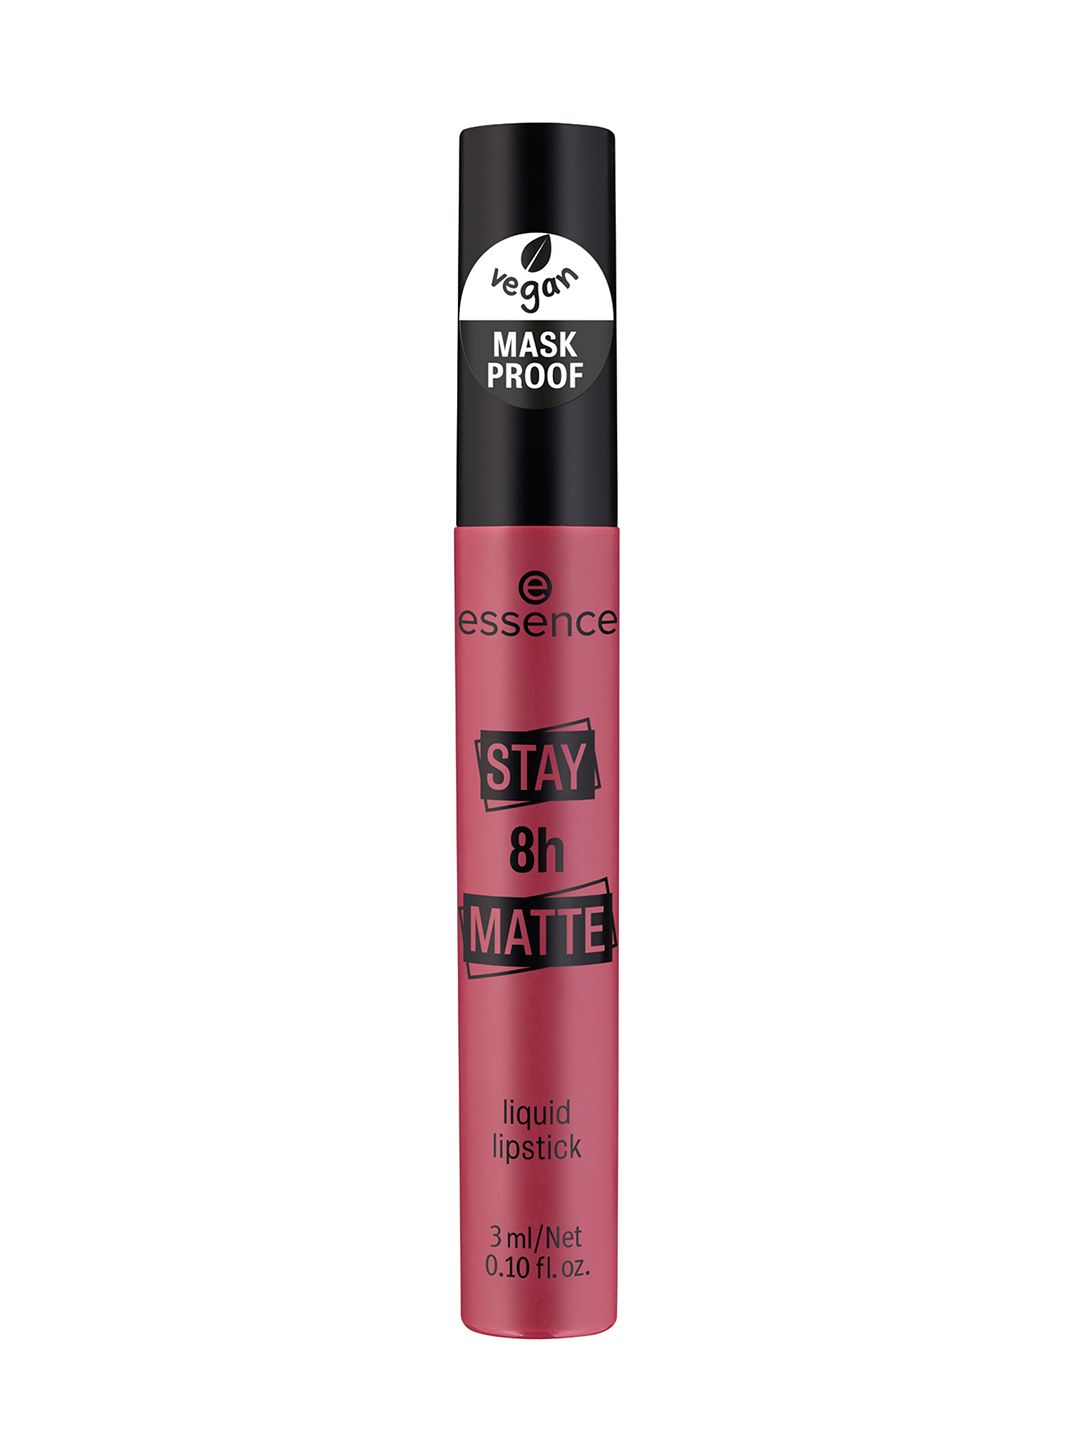 essence Mask Proof Stay 8h Matte Liquid Lipstick 3 ml - Bite Me If You Can 09 Price in India